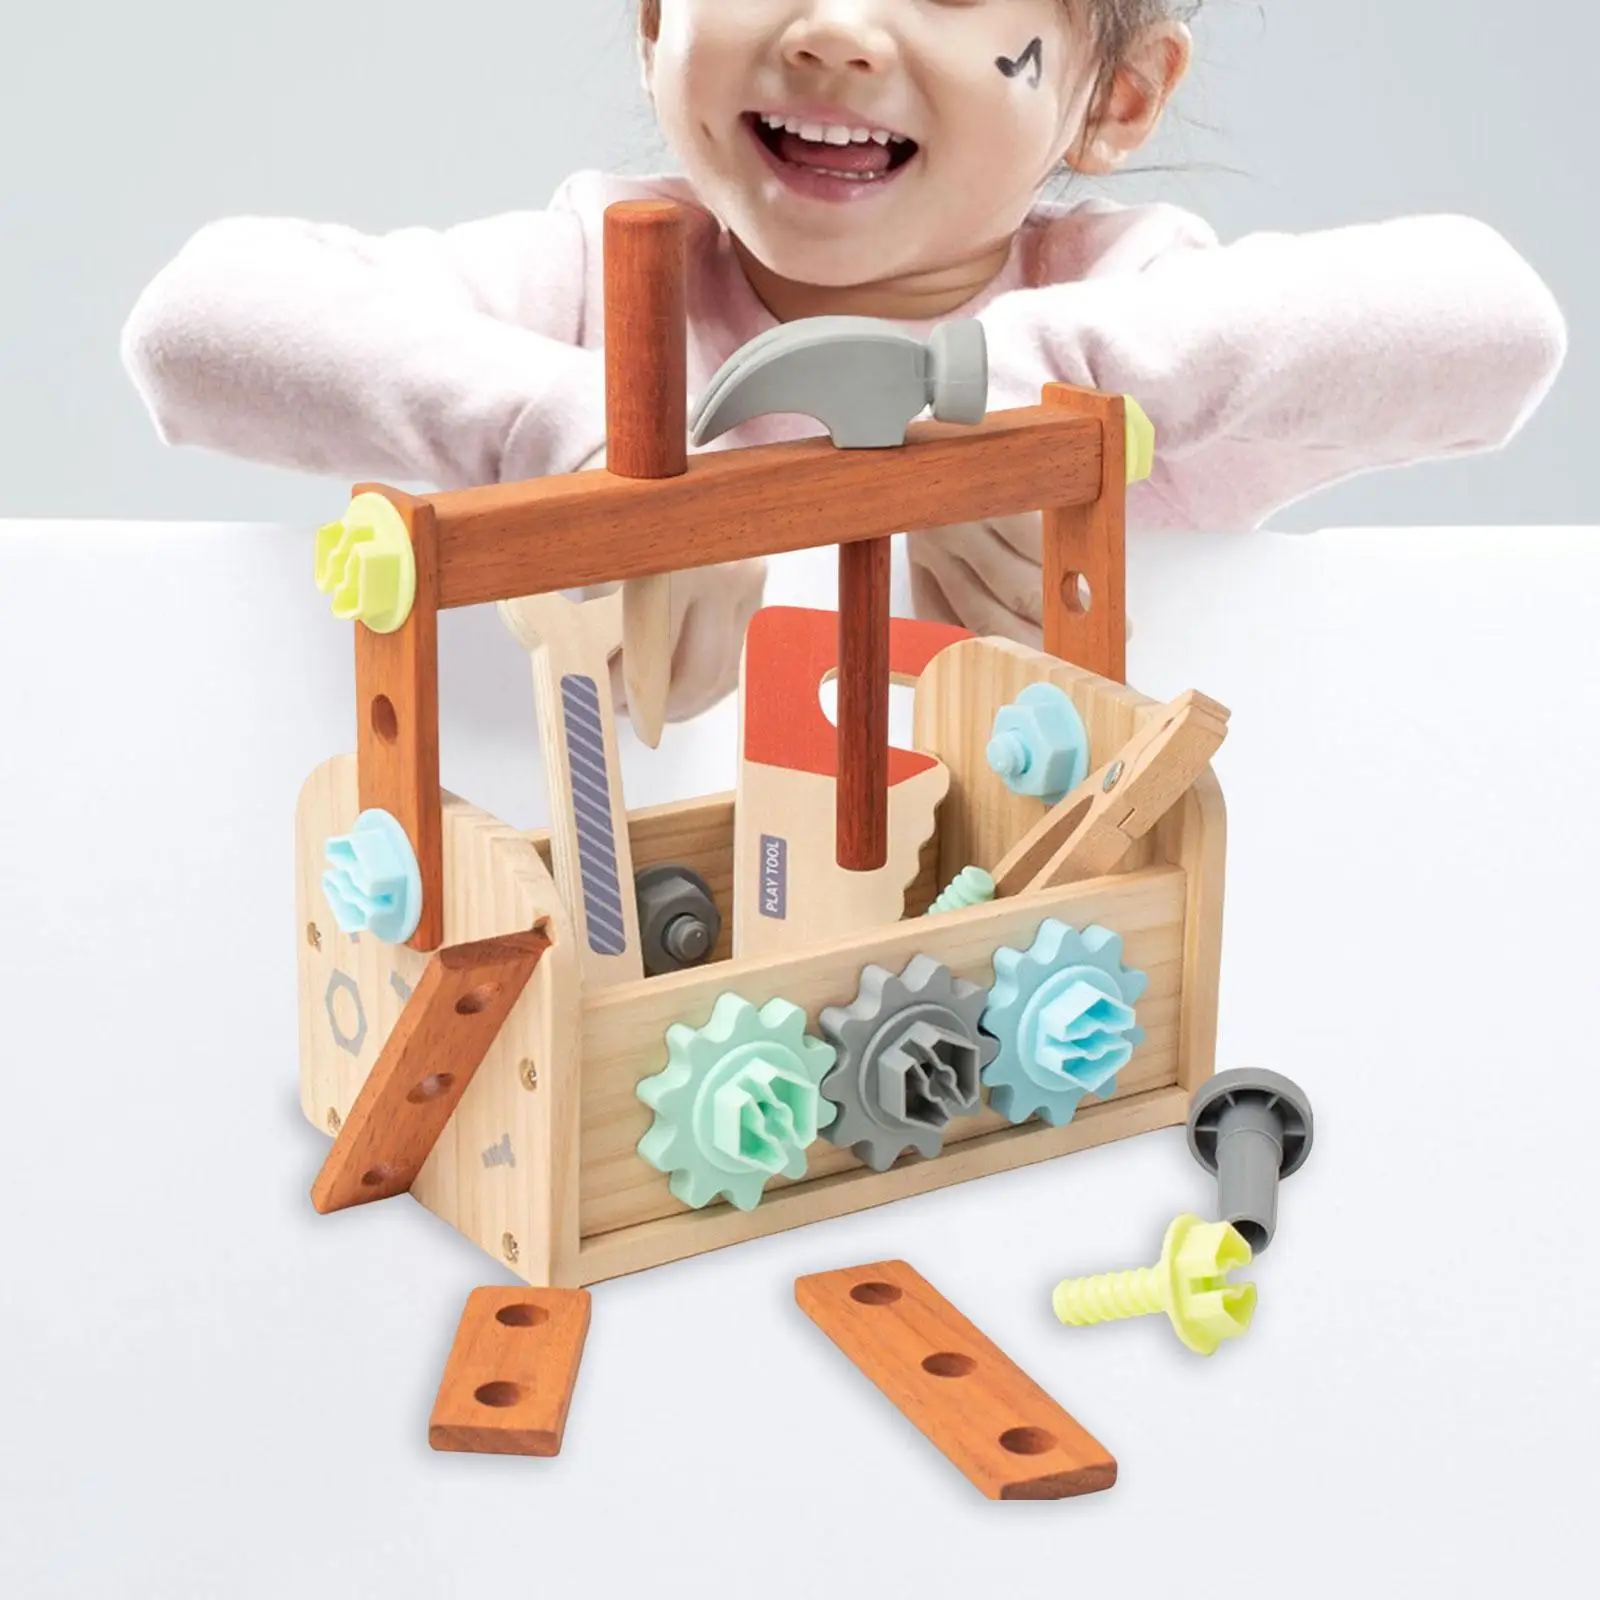 Kids Tool Set Wooden Construction Toy for Kids 2 3 4 5 6 Year Old Boys Girls